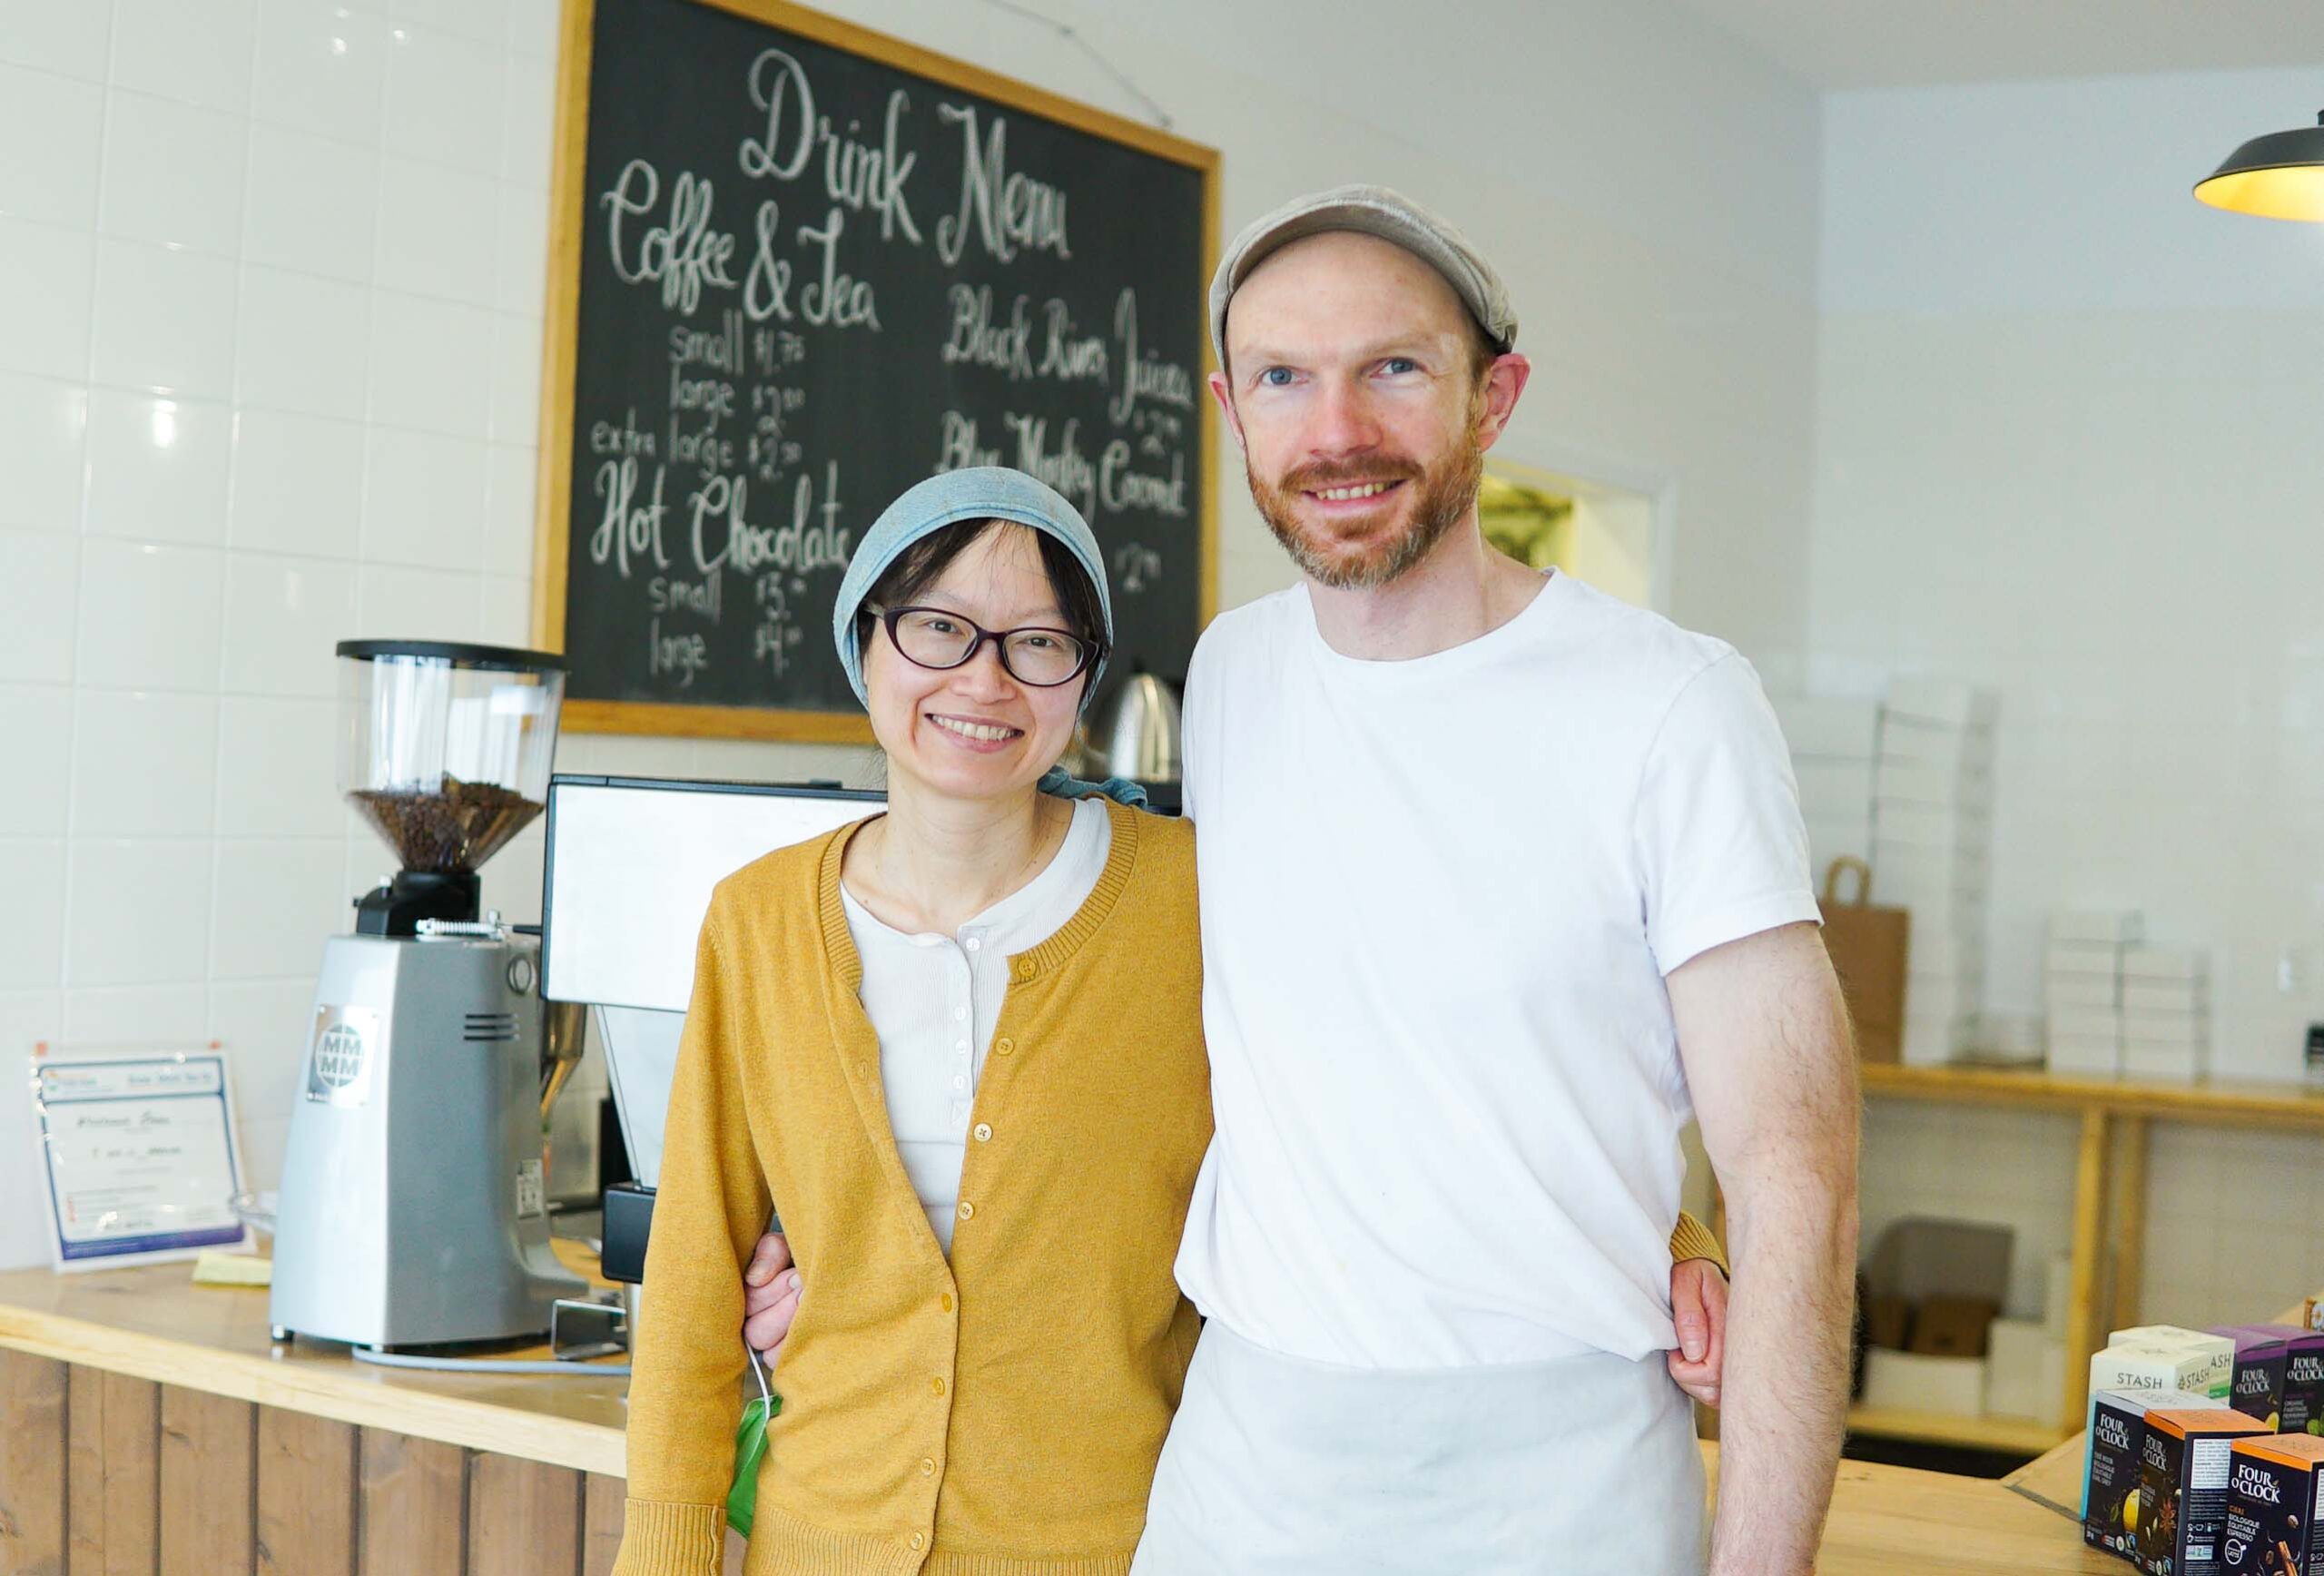 a man and woman in front of bakery counter with chalkboard menu behind them